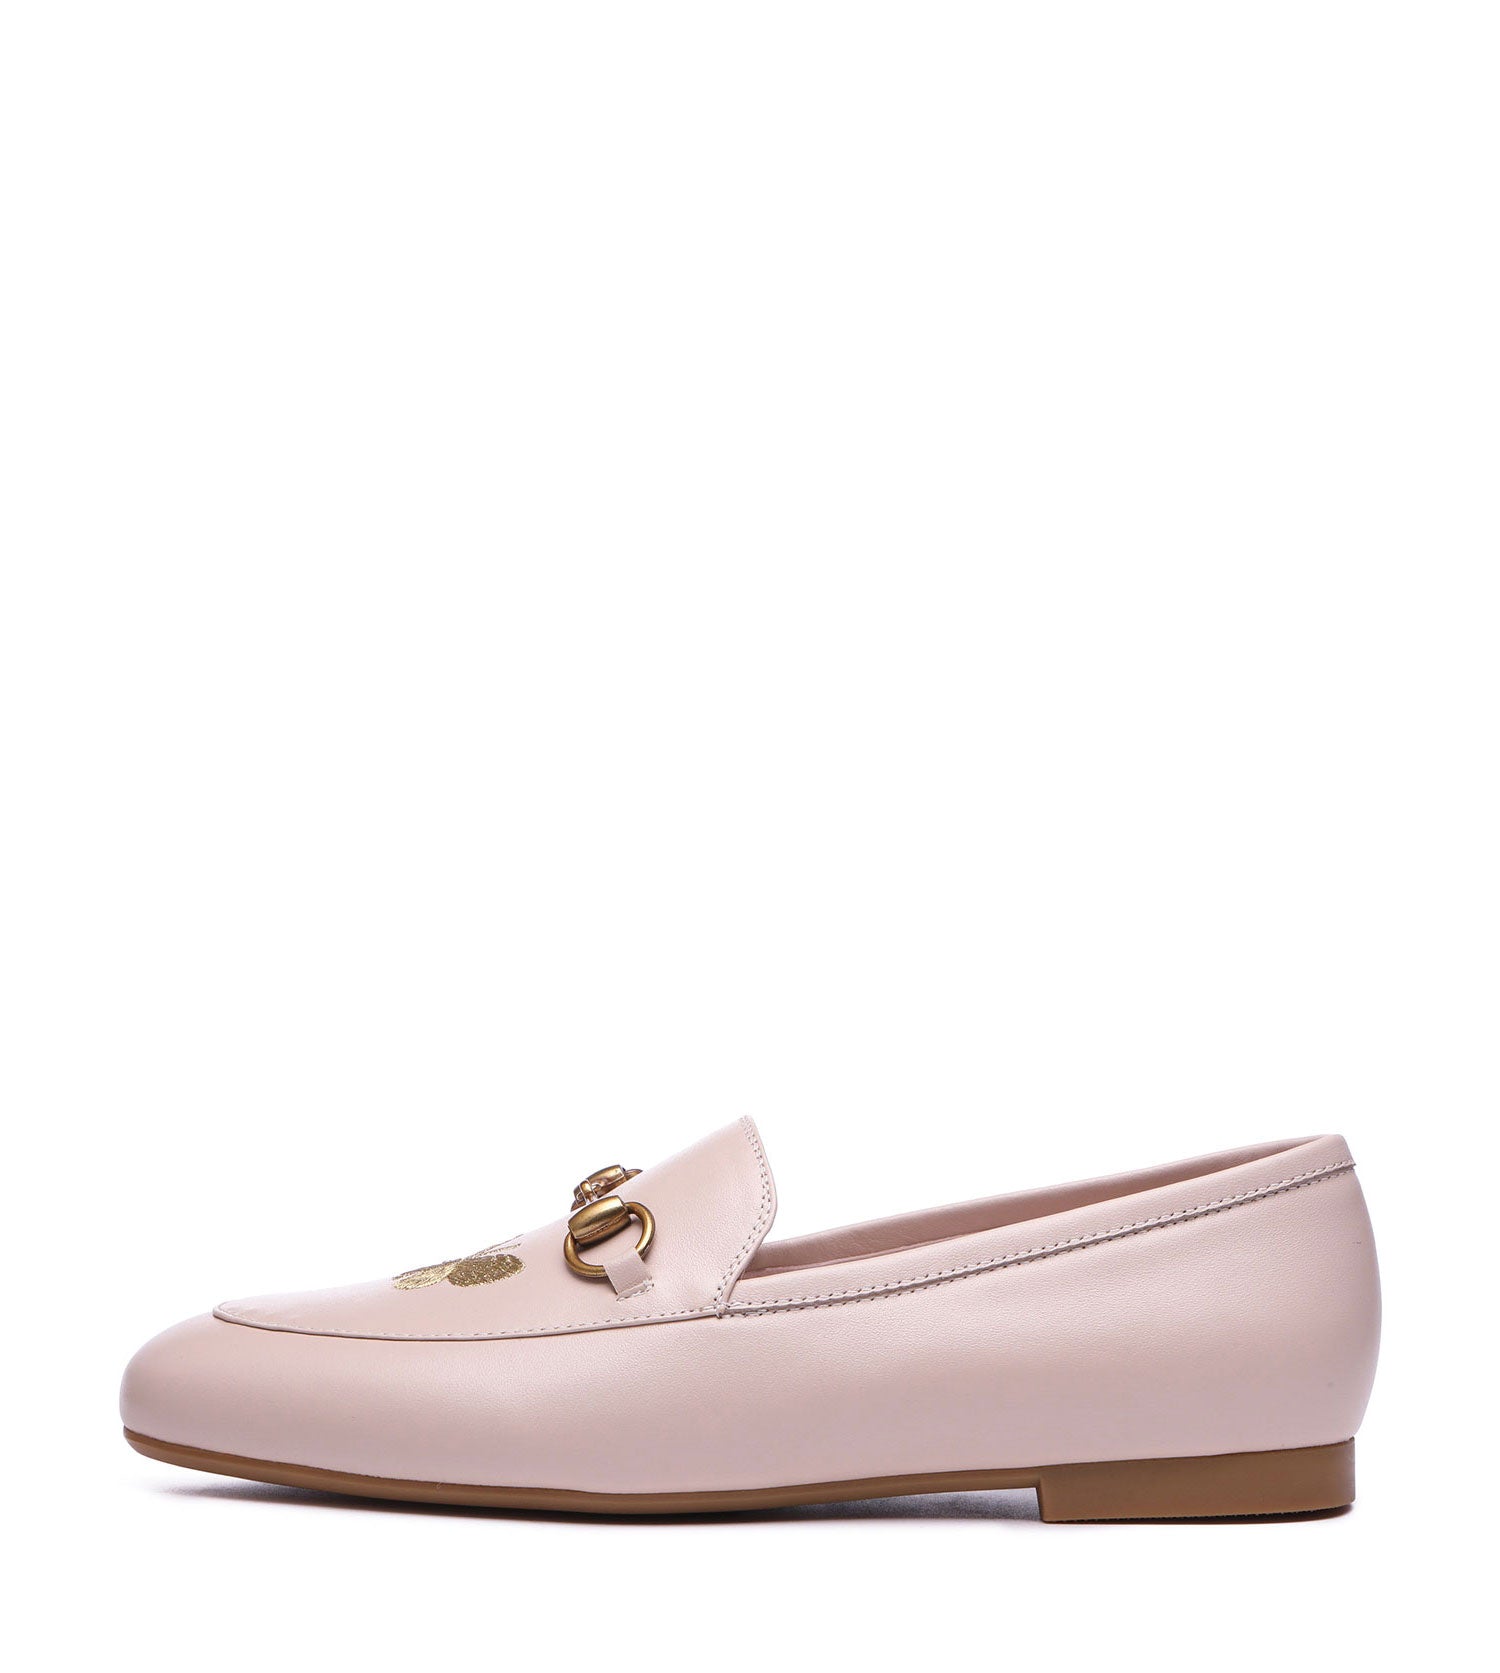 Everau x Kerrie Hess Papillon Loafer Oxfords Flats for Women - EA7021 - EVERAU-Loafers &amp; Moccasins-PEROZ Accessories